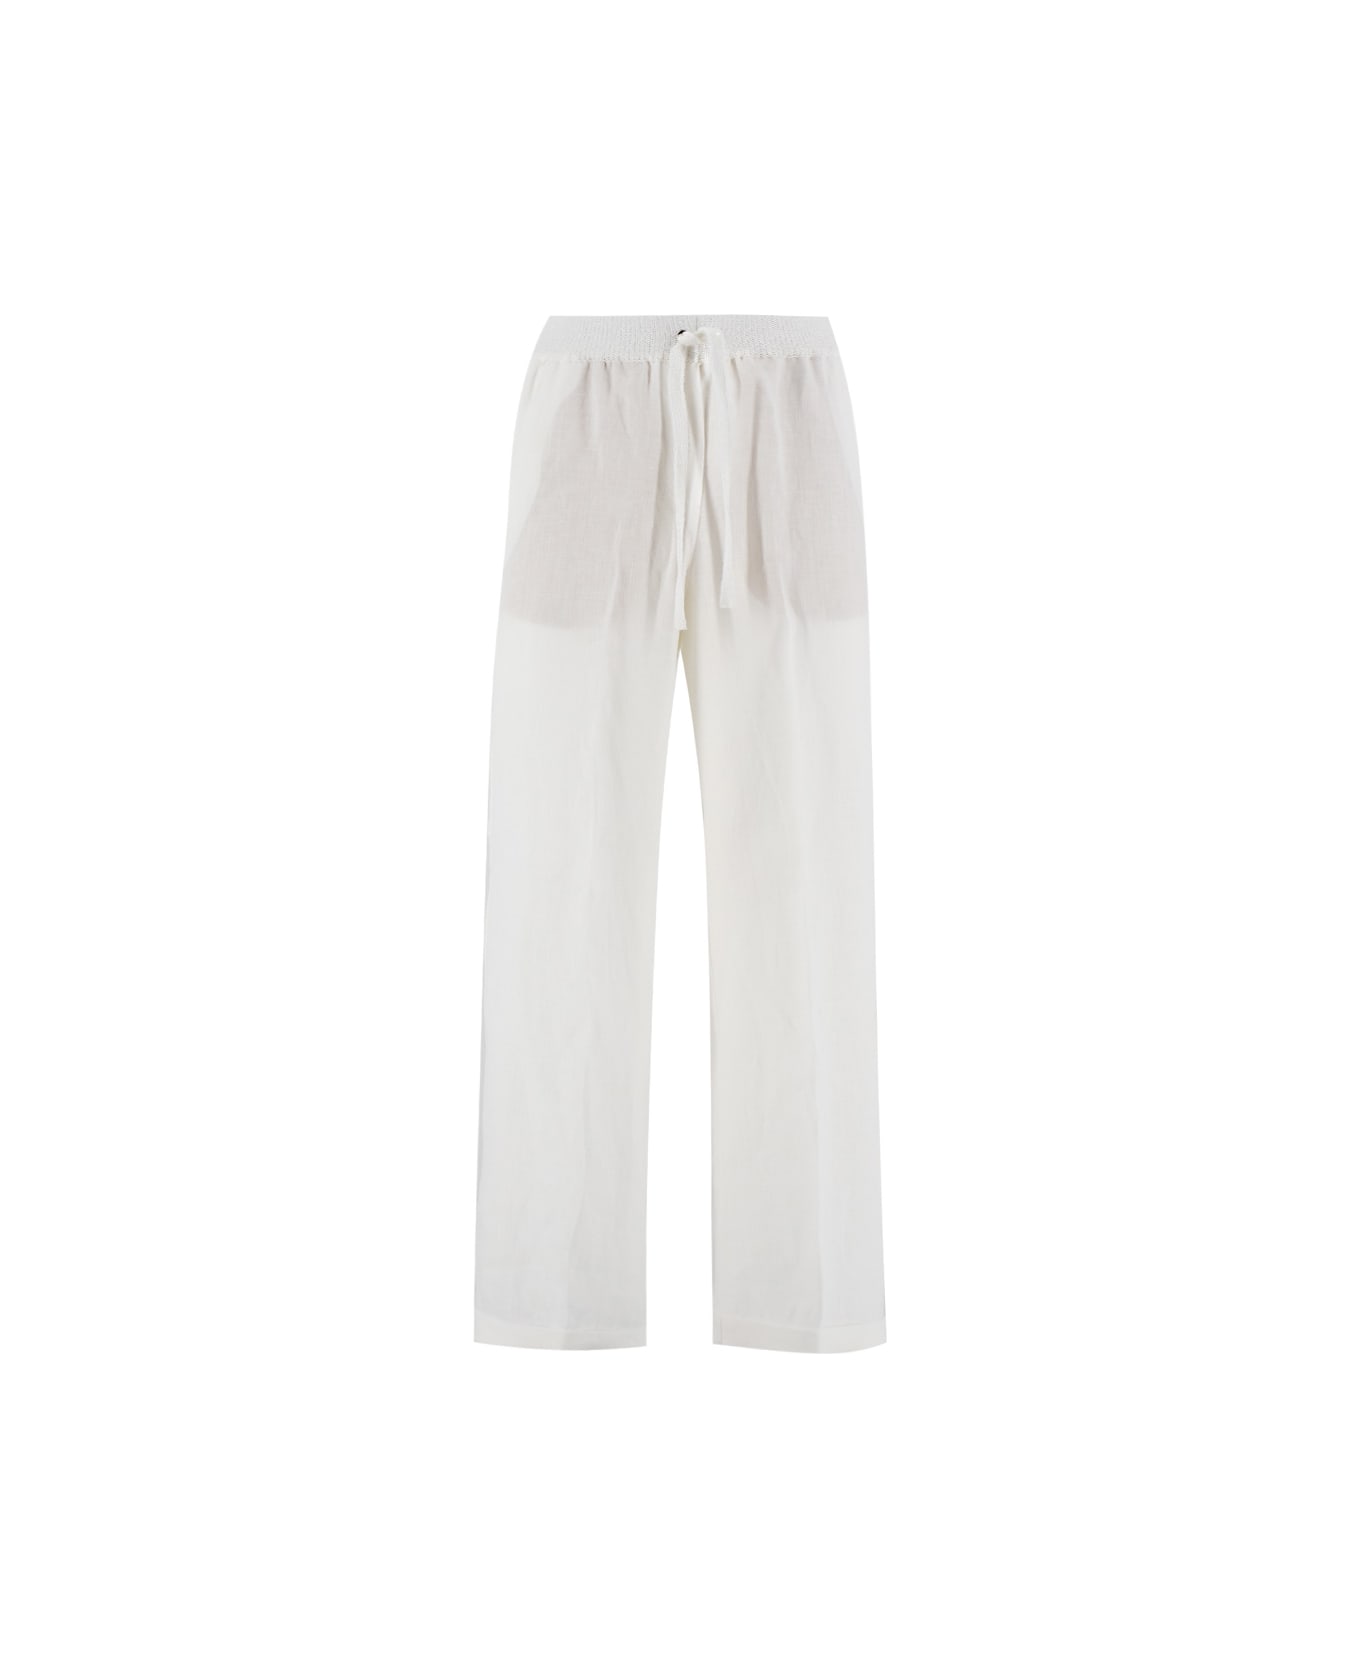 Le Tricot Perugia Trousers eng - WHITE